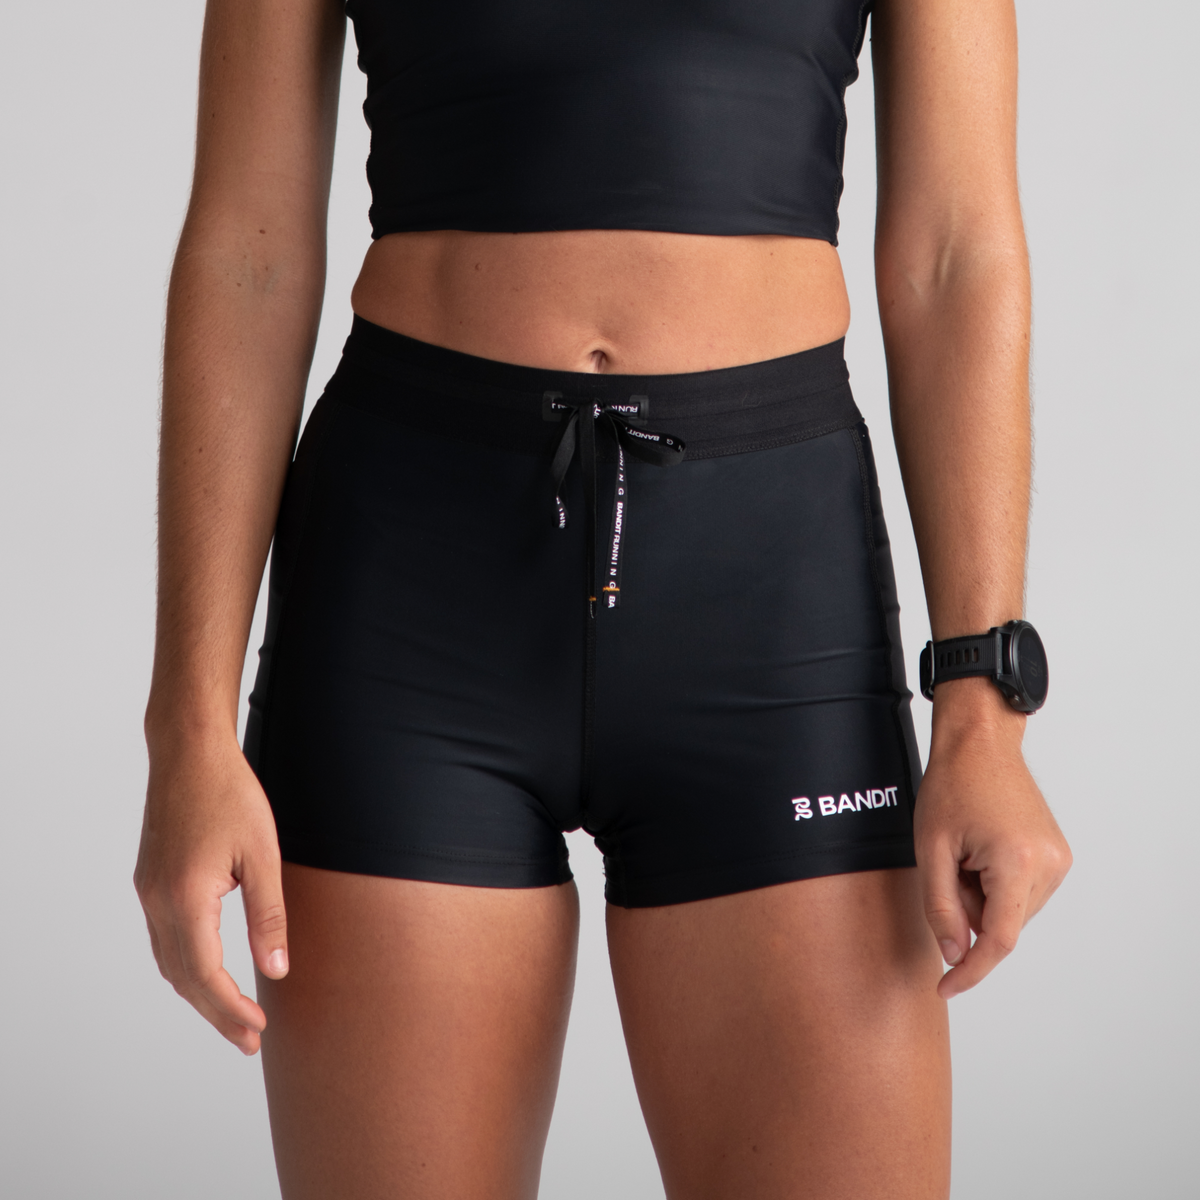 New Year, New You – Best Athletic Wear Items for 2020 - Shop Q